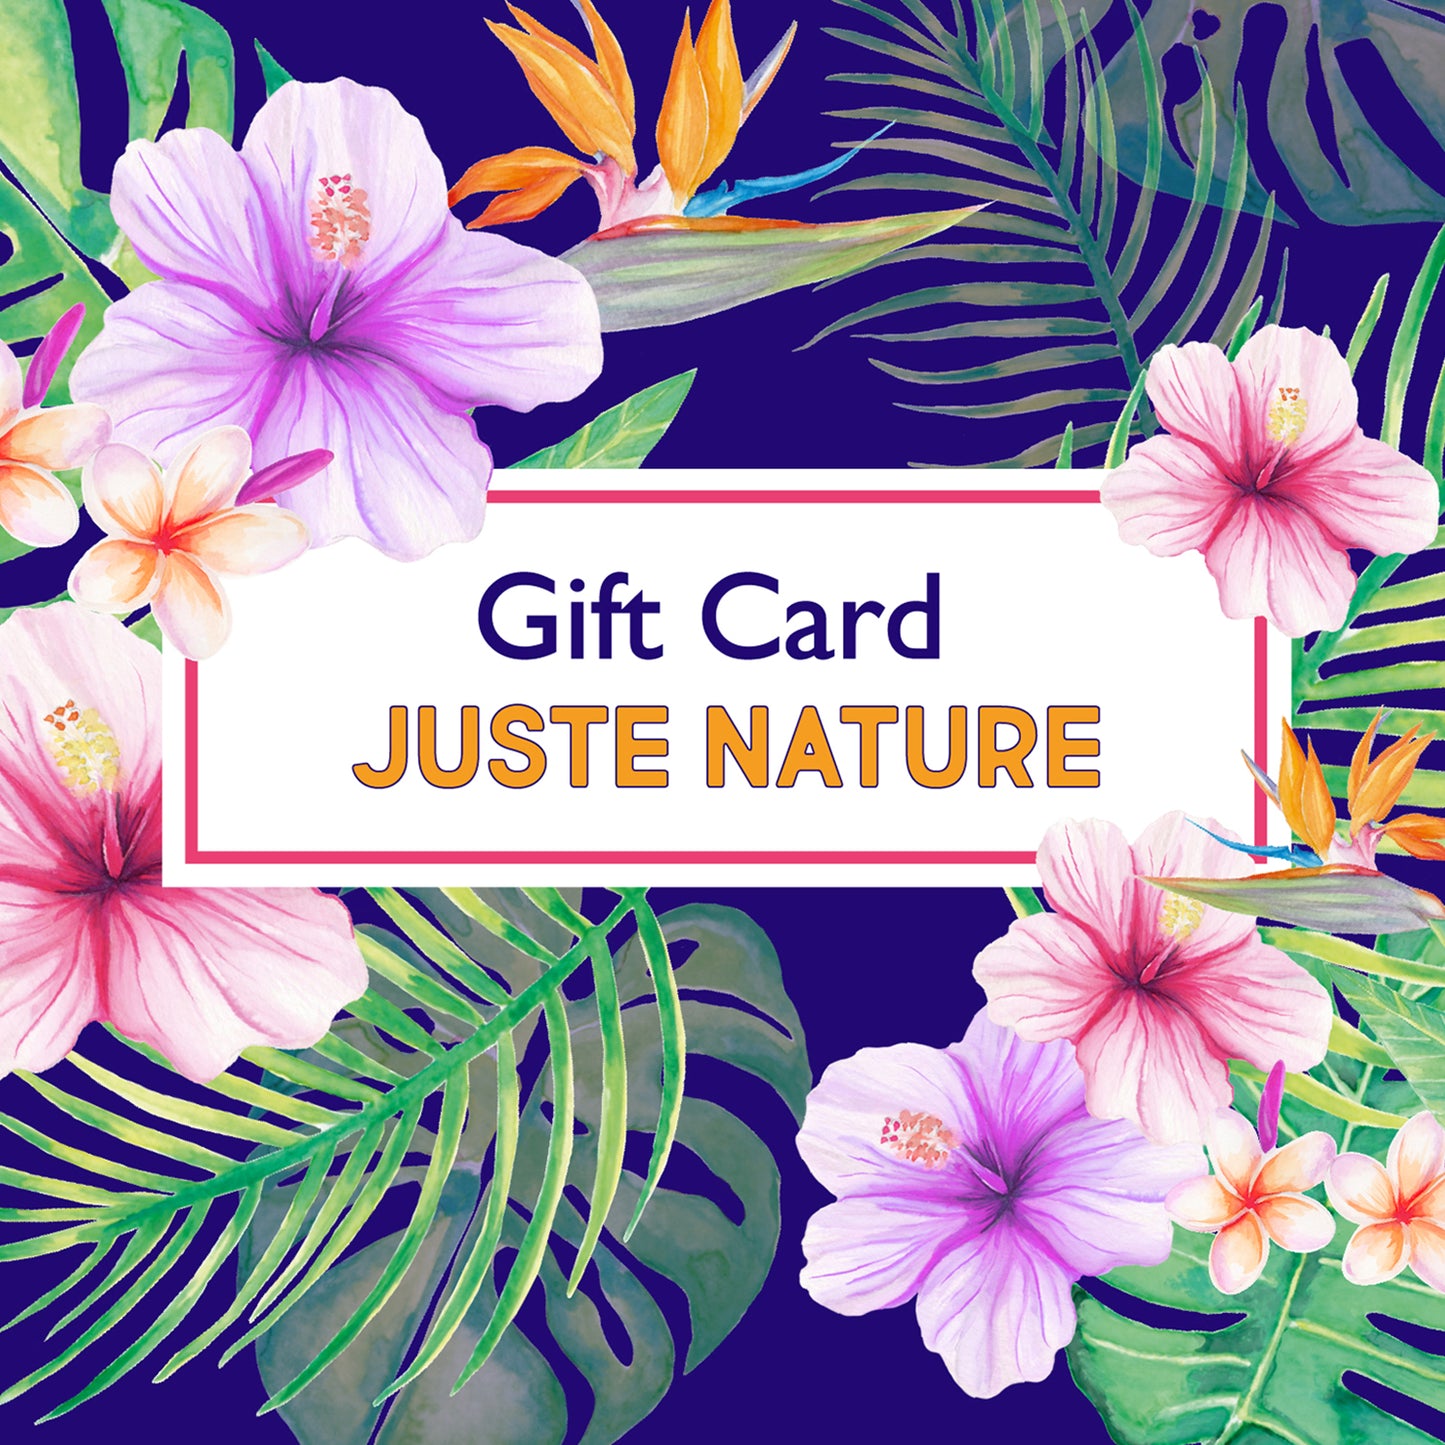 JUSTE NATURE GIFT CARD